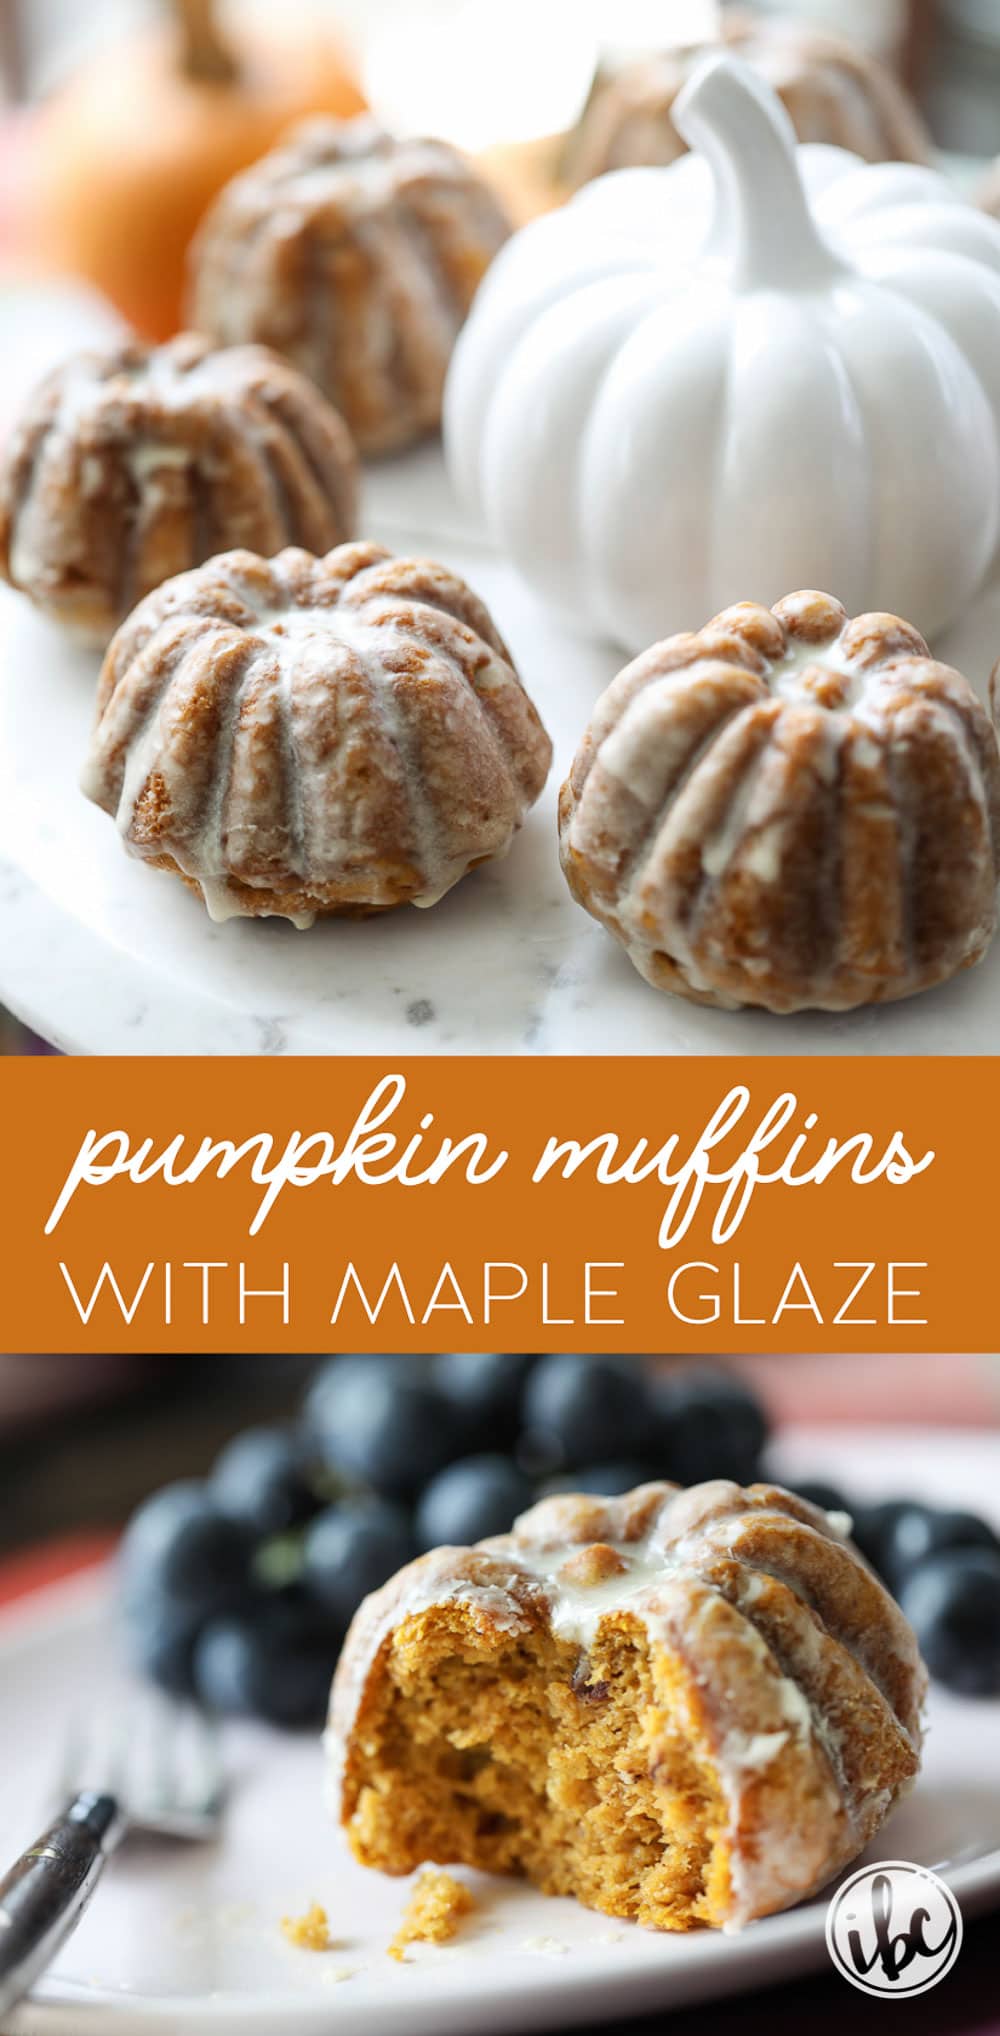 These Pumpkin Muffins with Maple Glaze make the perfect fall breakfast, brunch, or dessert treat. #pumpkin #muffins #maple #glaze #breakfast #dessert #pumpkinspice #recipe